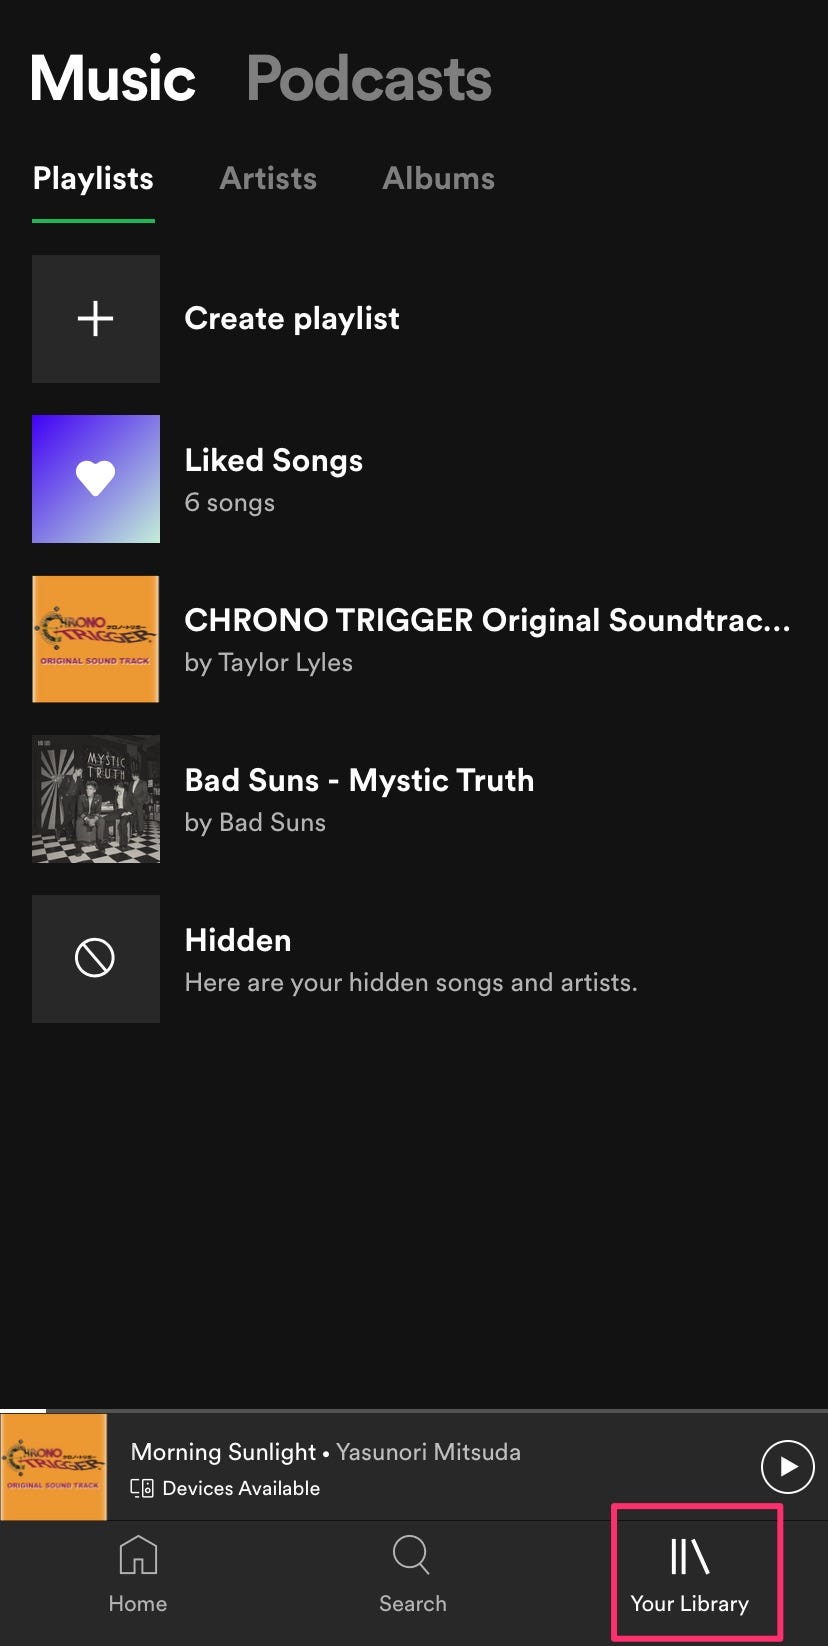 How To Download Songs On Spotify?